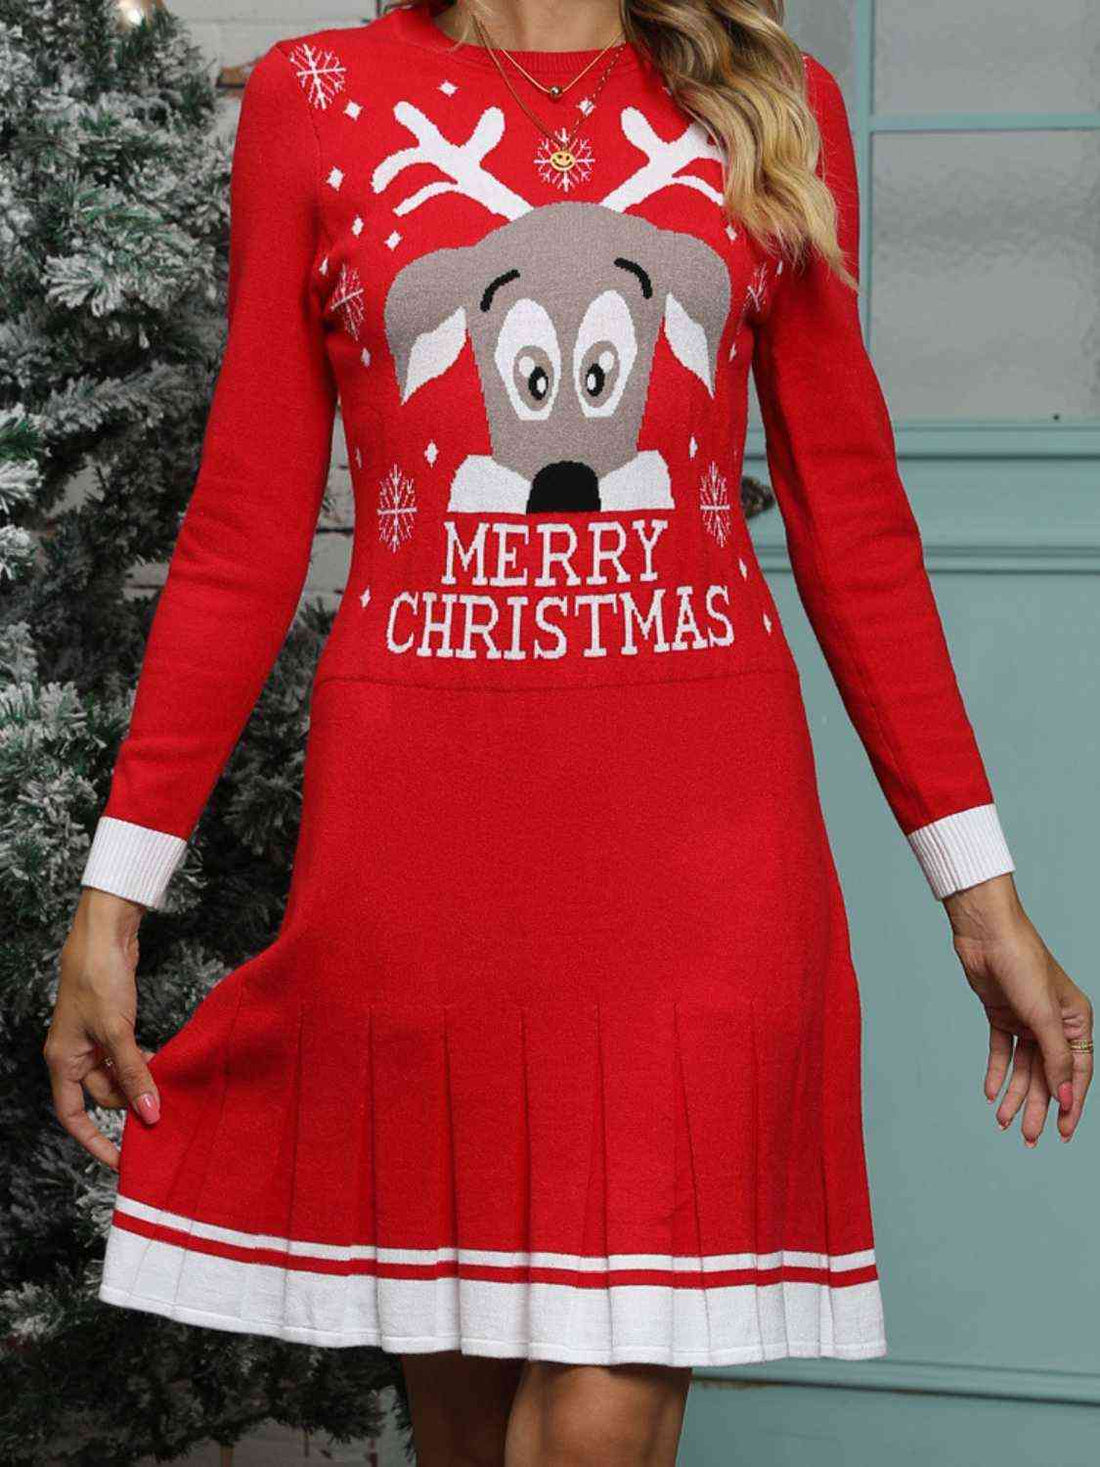 A festive holiday sweater dress by Unique Kulture featuring a Merry Christmas graphic design with pleated detailing."